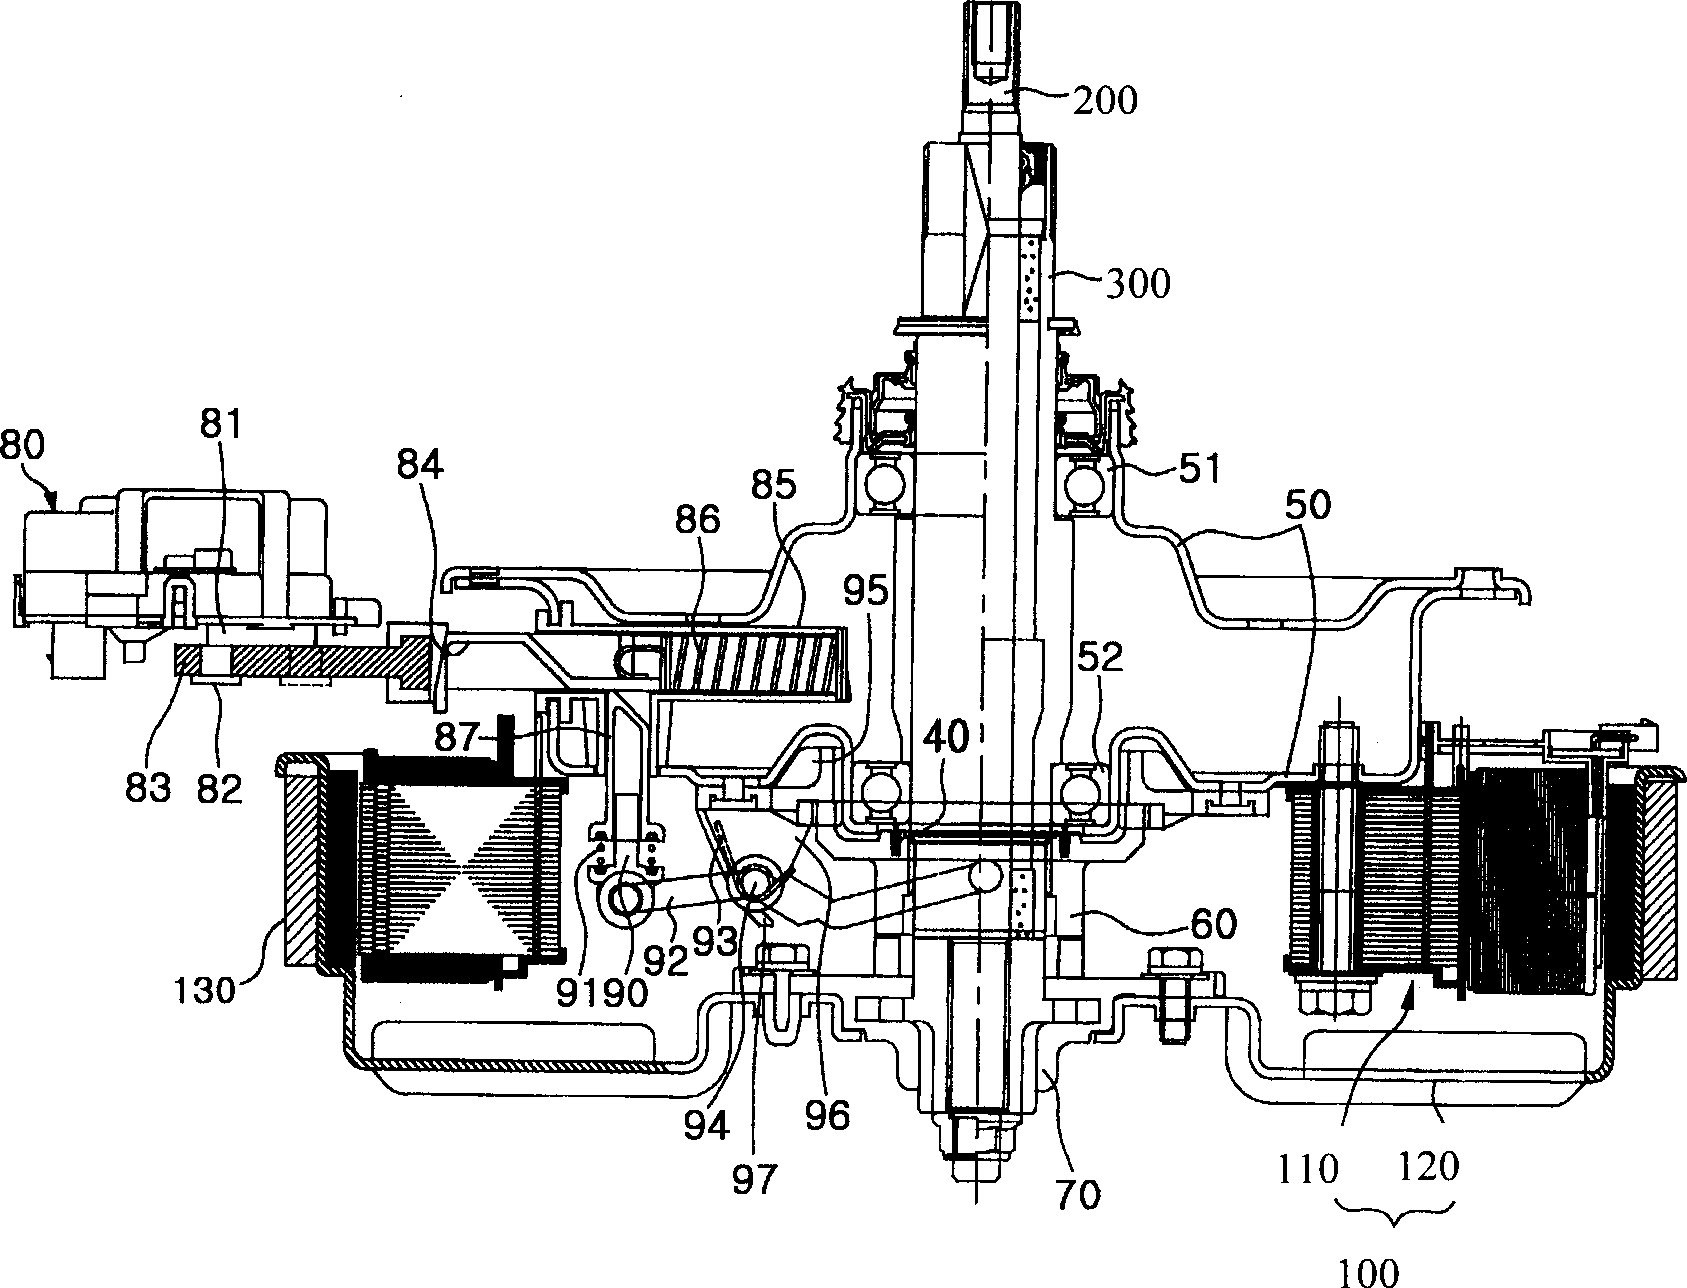 Electric machine structure of washing machine for lowering noise and reducing vibration